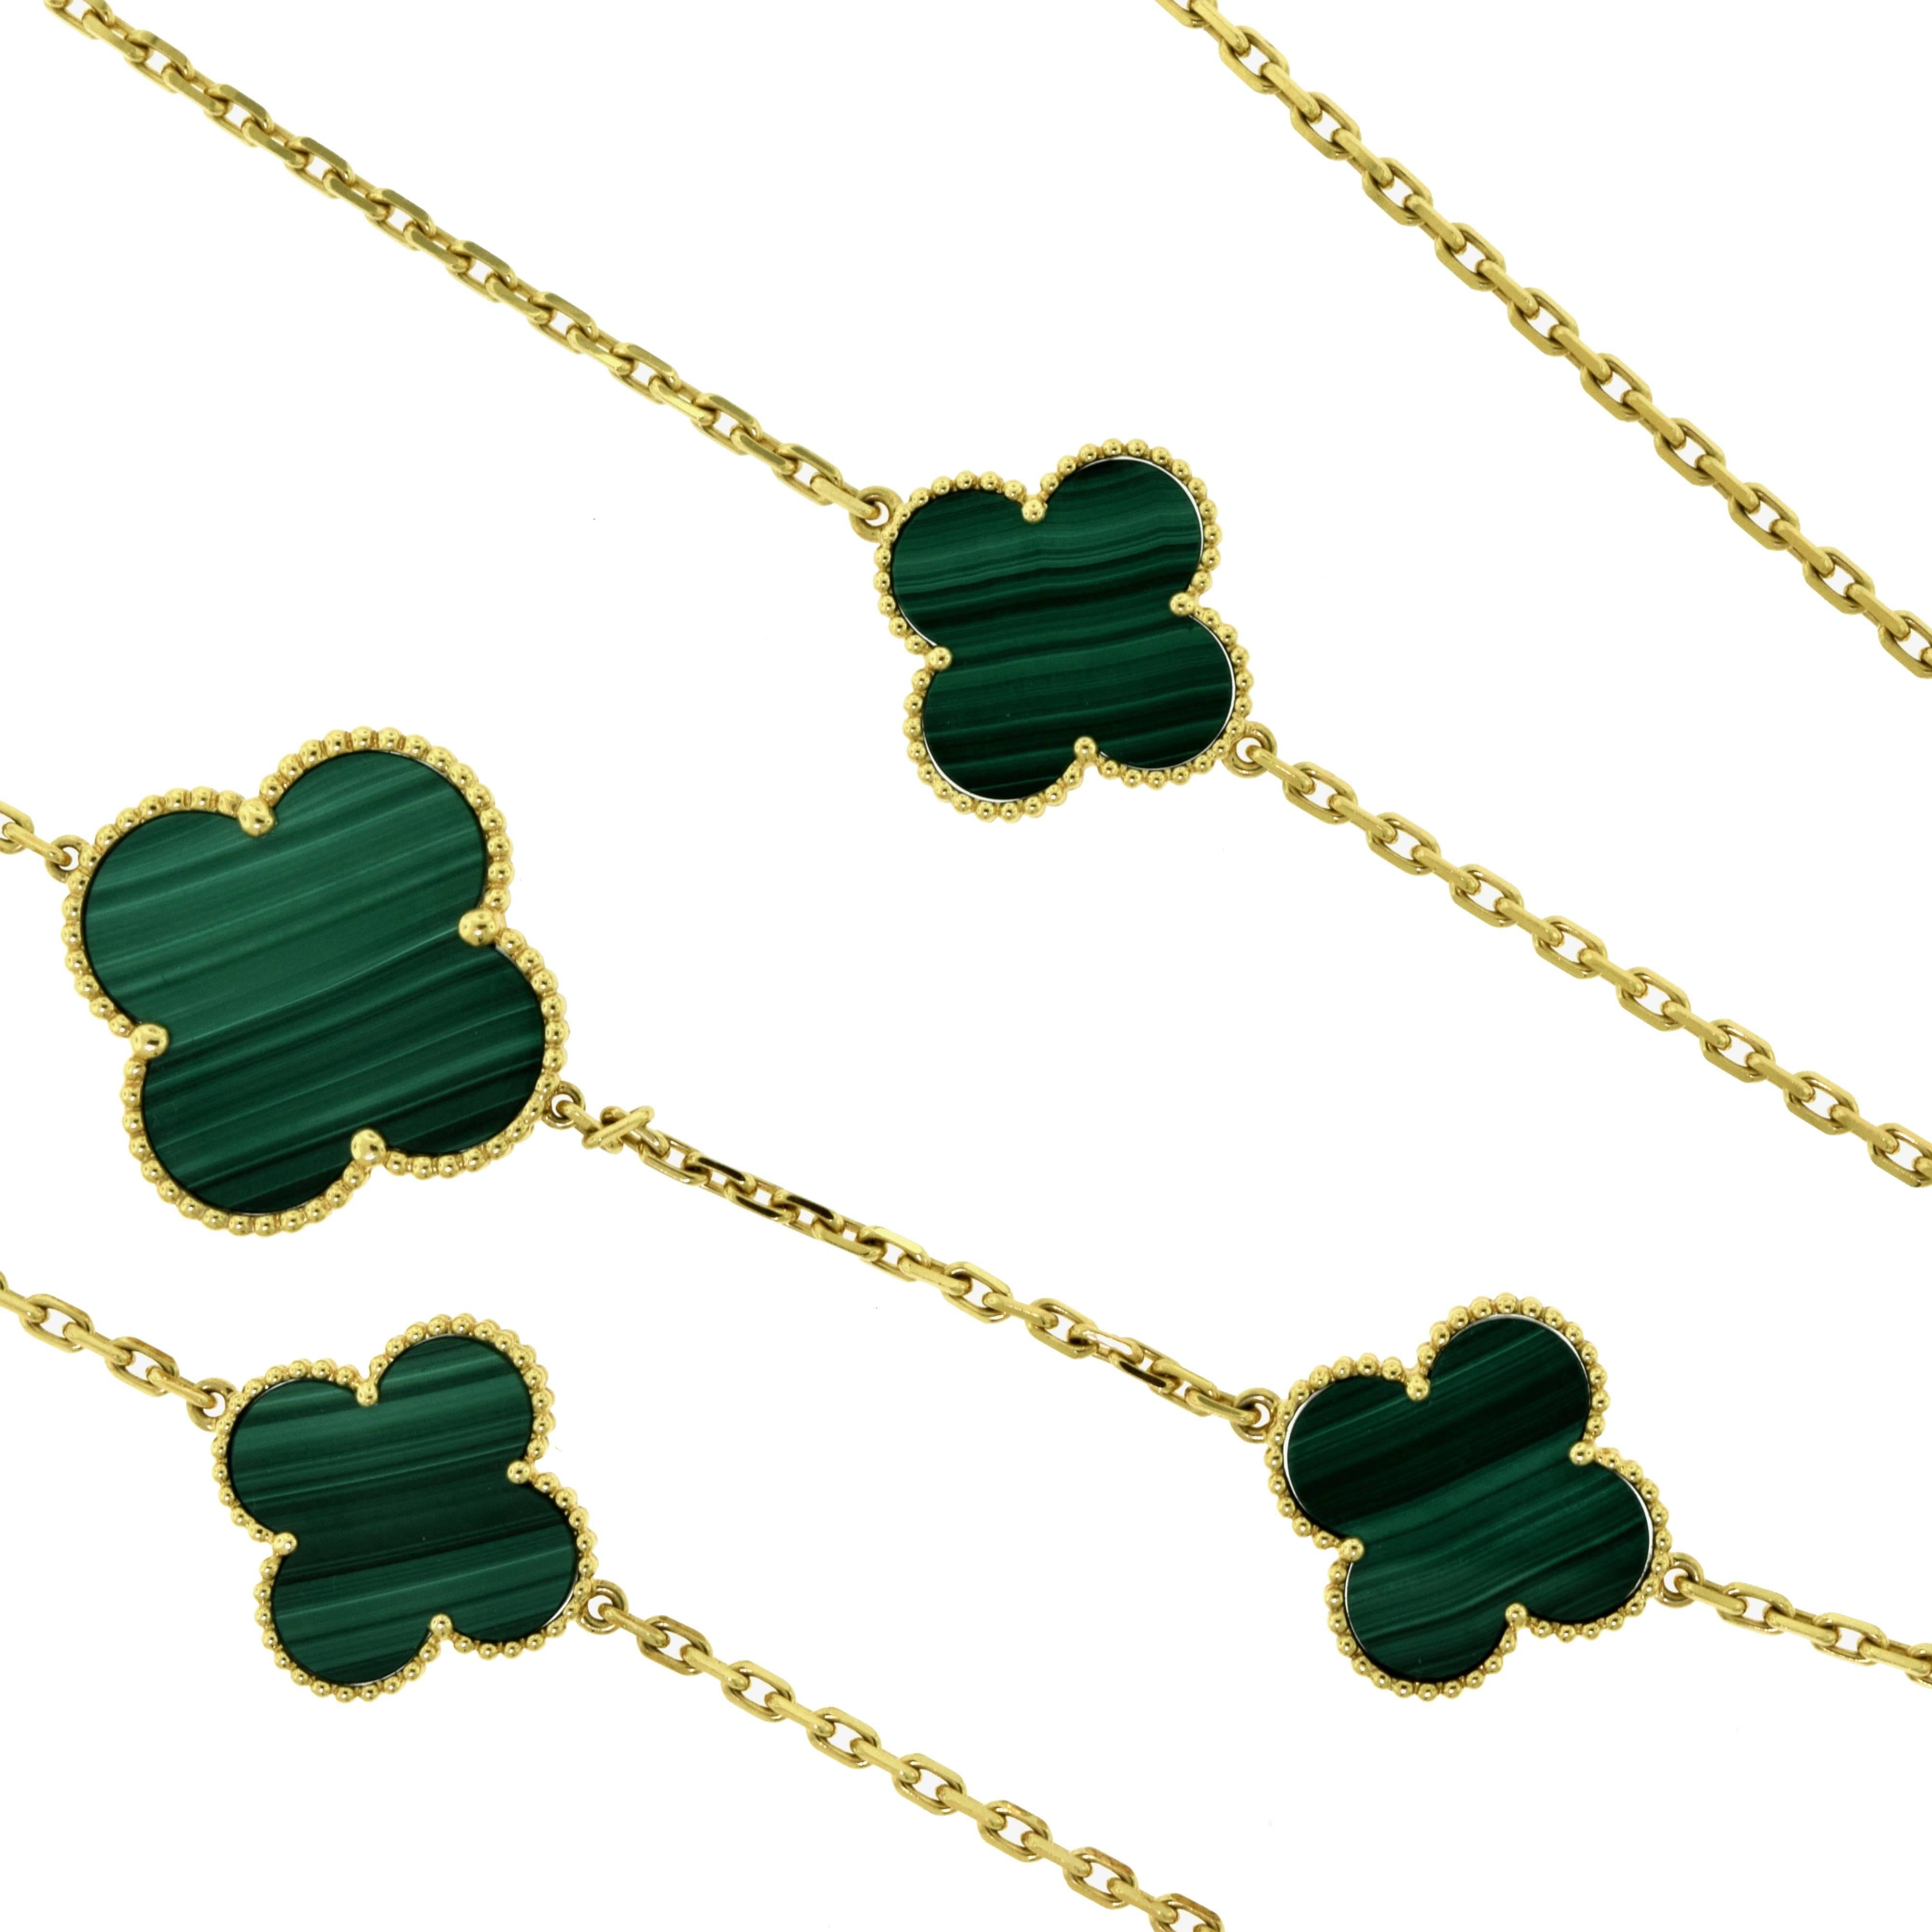 From Van Cleef & Arpel's Magic Alhambra Collection is this absolutely gorgeous long Malachite Necklace
Stones: Malachite
Total Item Weight (g): 70.5
Length: 48.0 inches

Item Description:
Created in 2006 by Van Cleef & Arpels, the Magic Alhambra®